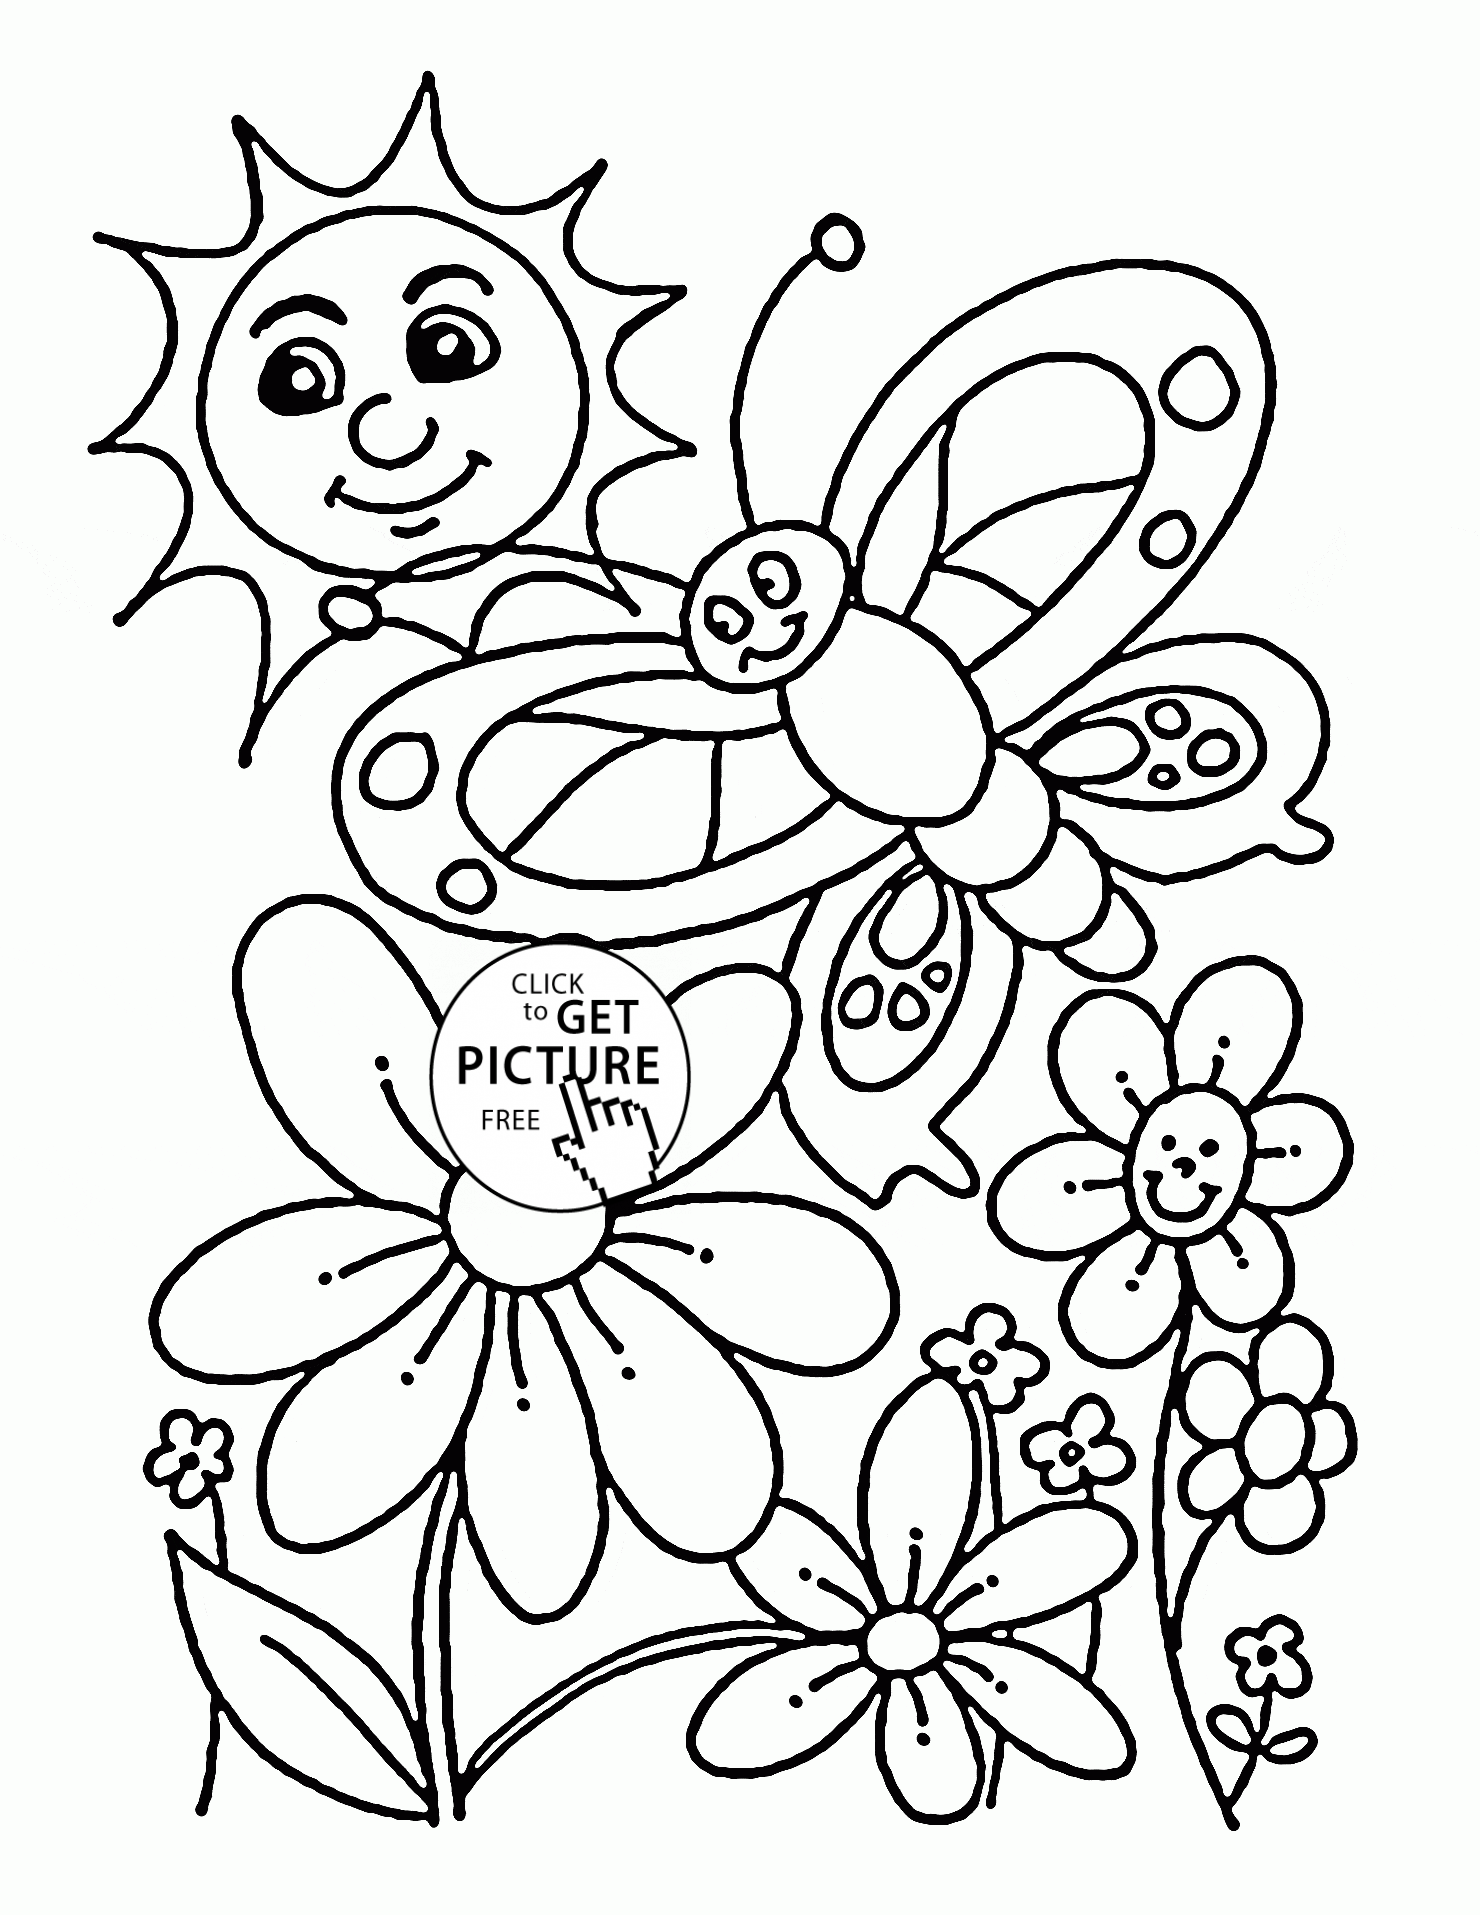 Cartoon Nature Coloring Page For Kids with simple drawing